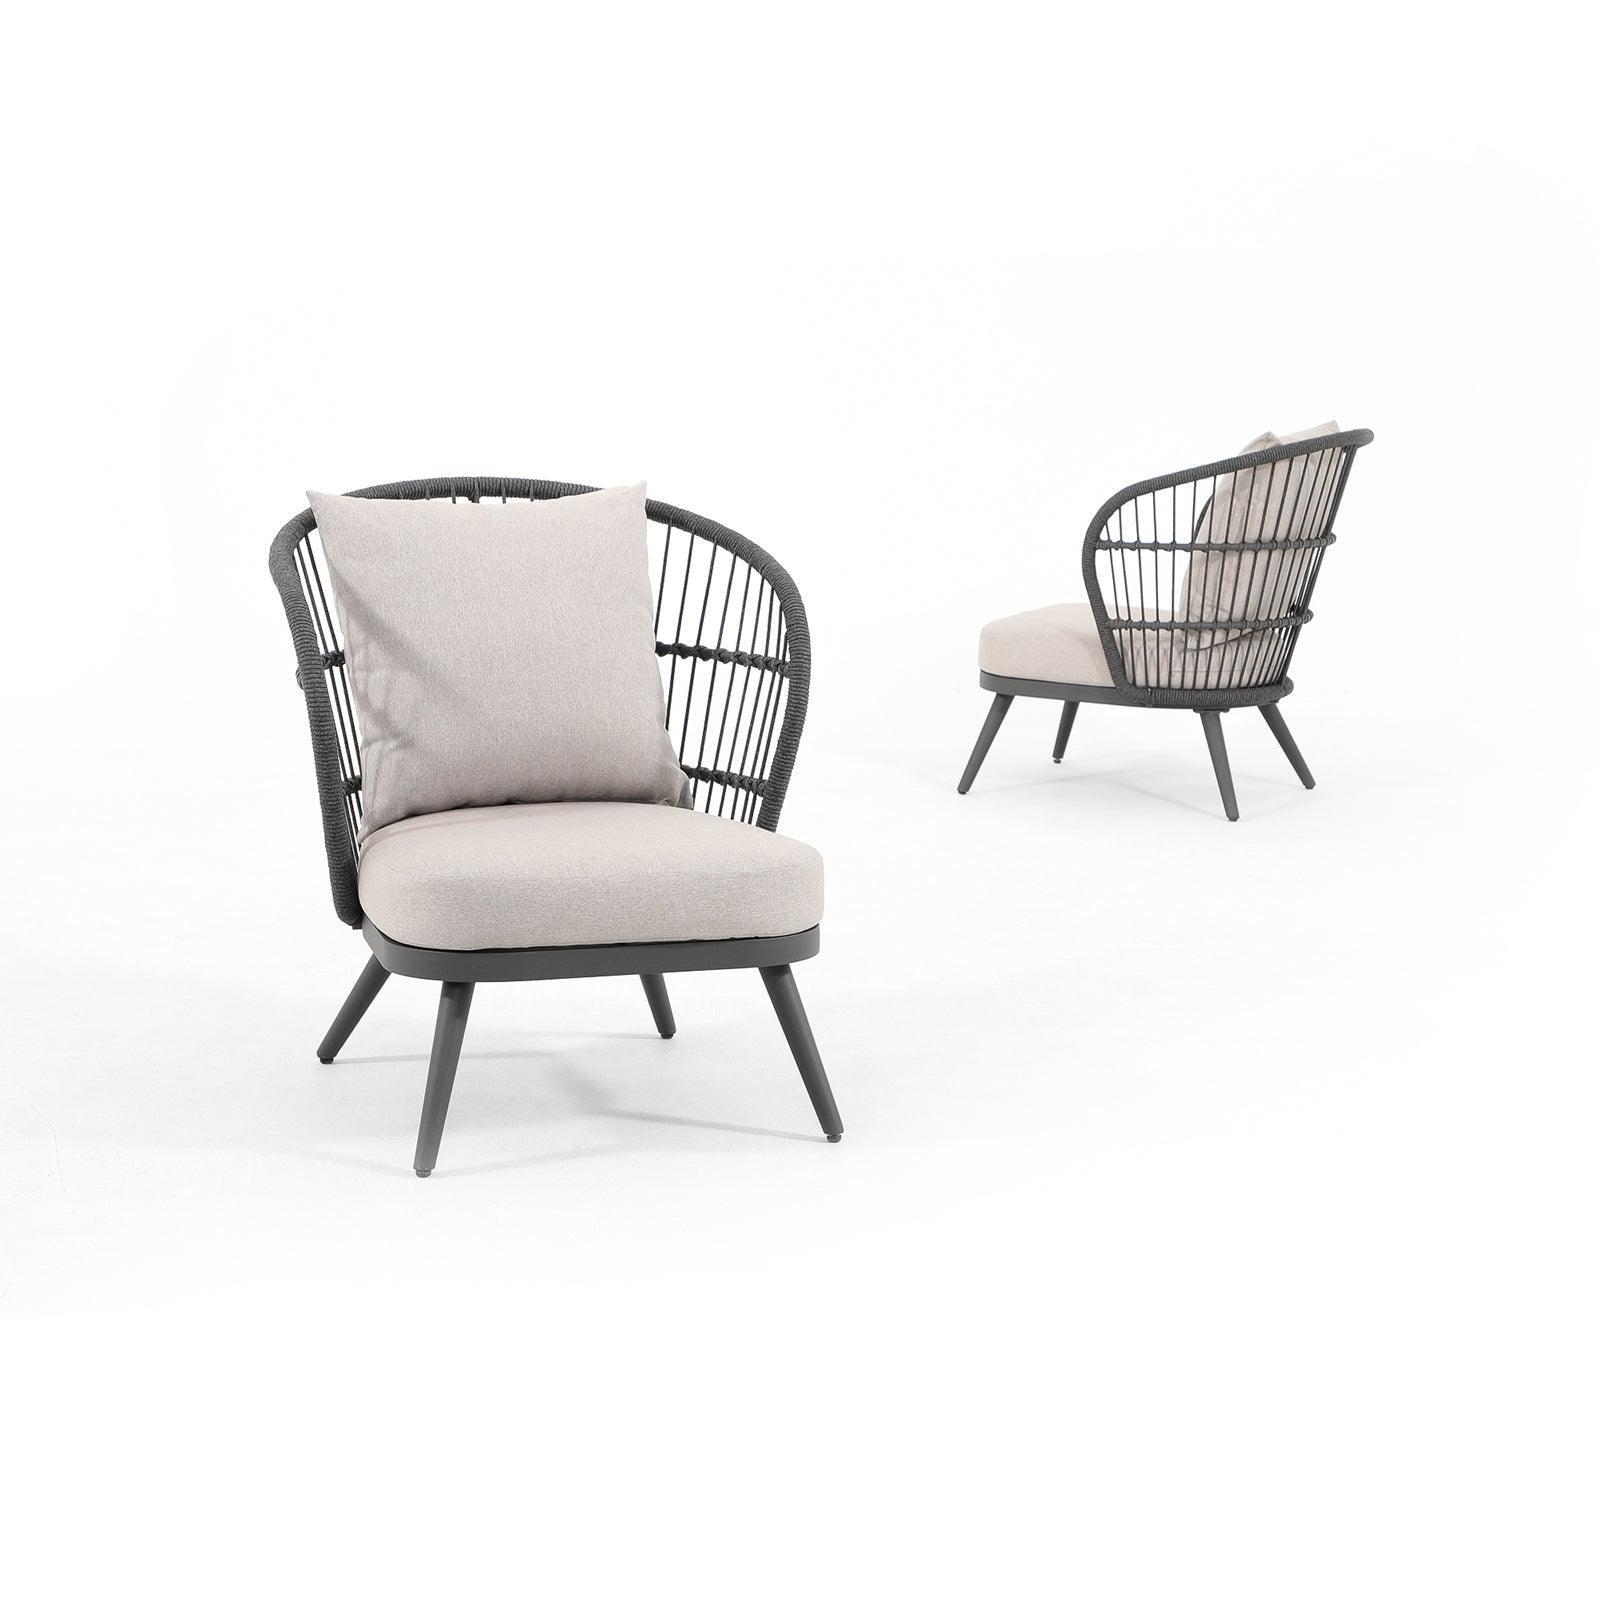 Comino dark grey rope chair with aluminum frame, light grey cushions, two different angles- Jardina Furniture